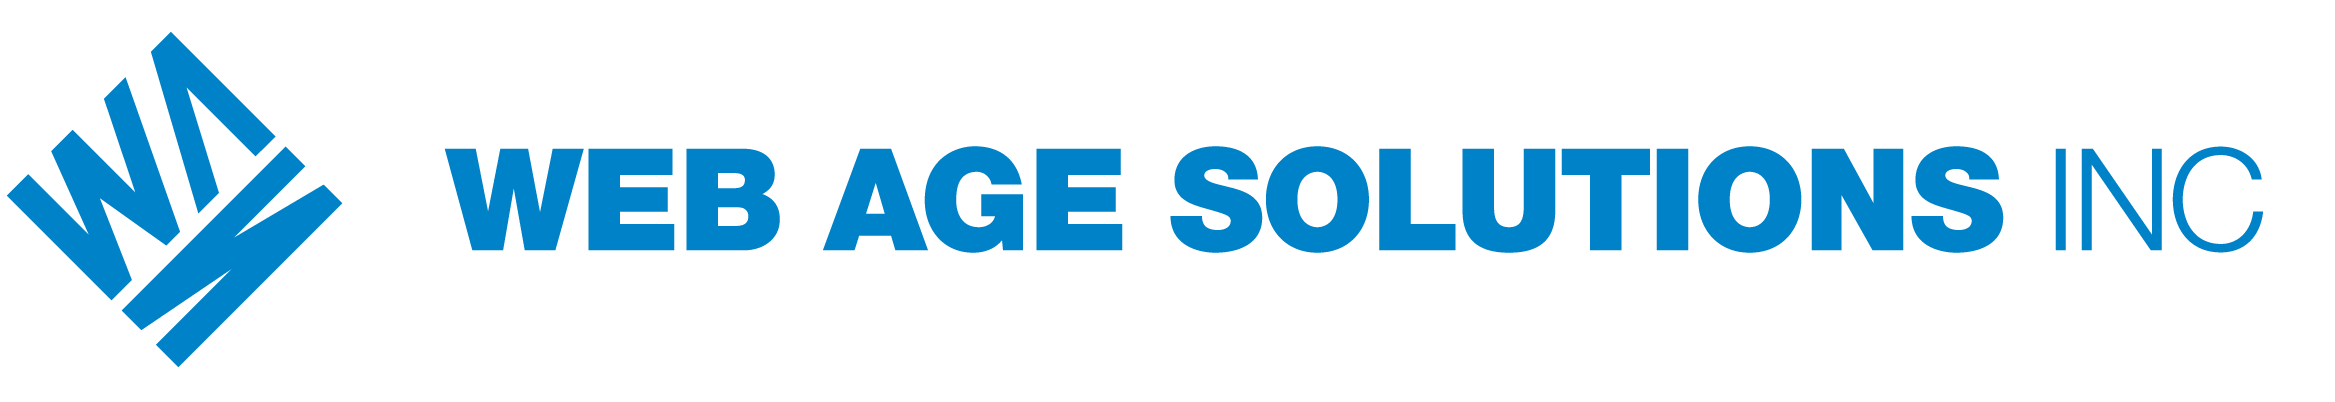 Web Age Solutions